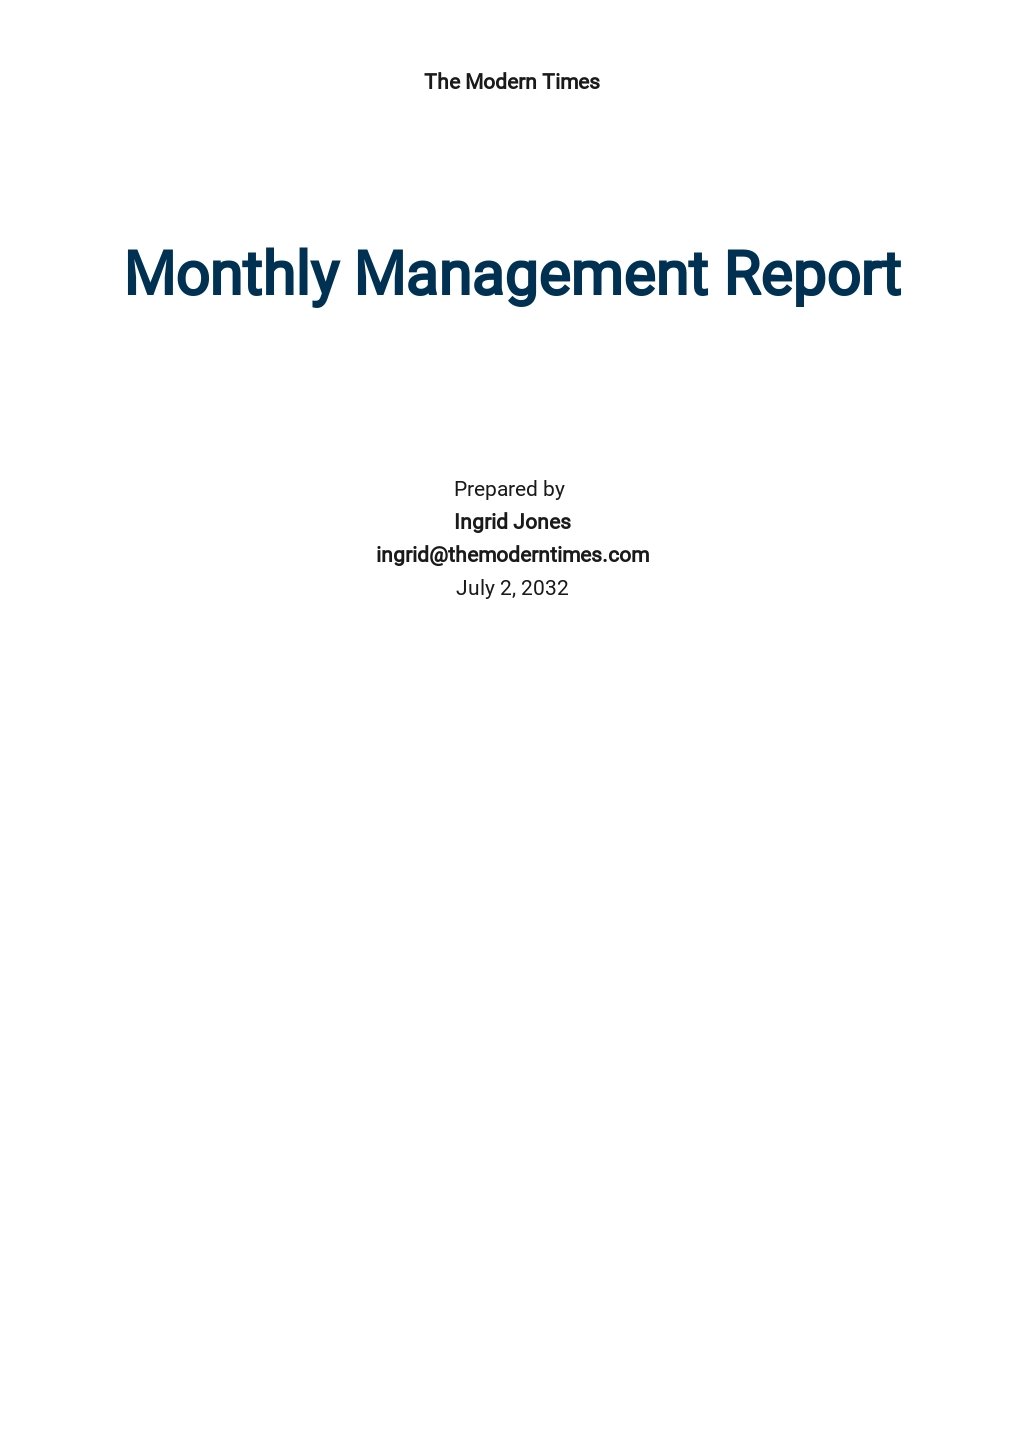 templete for time management report free 34